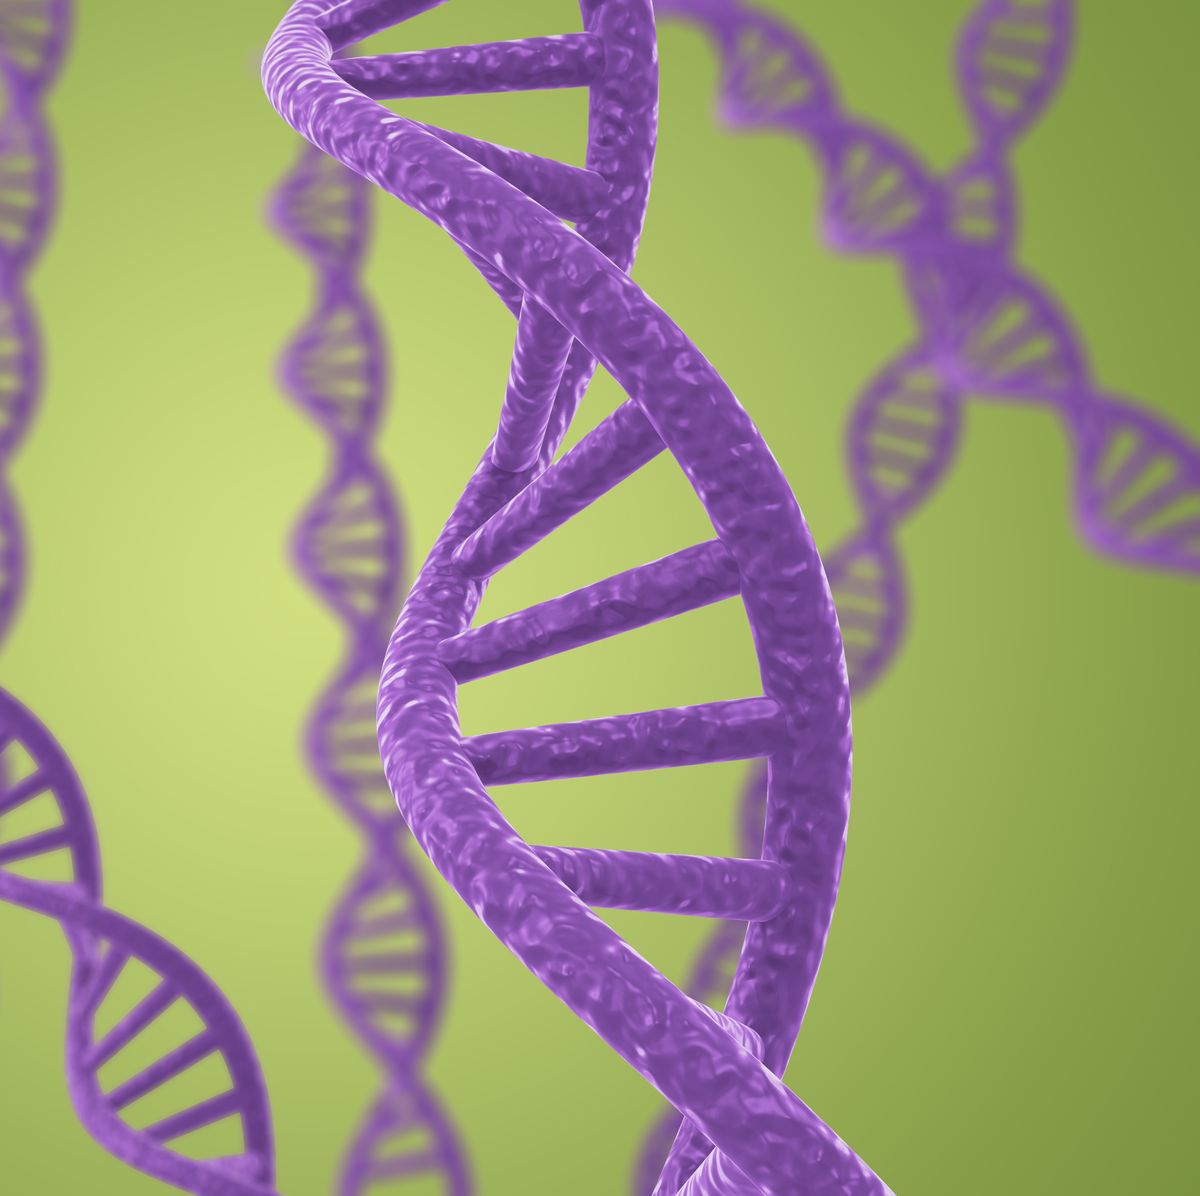 purple dna helices on a green background with shallow dof